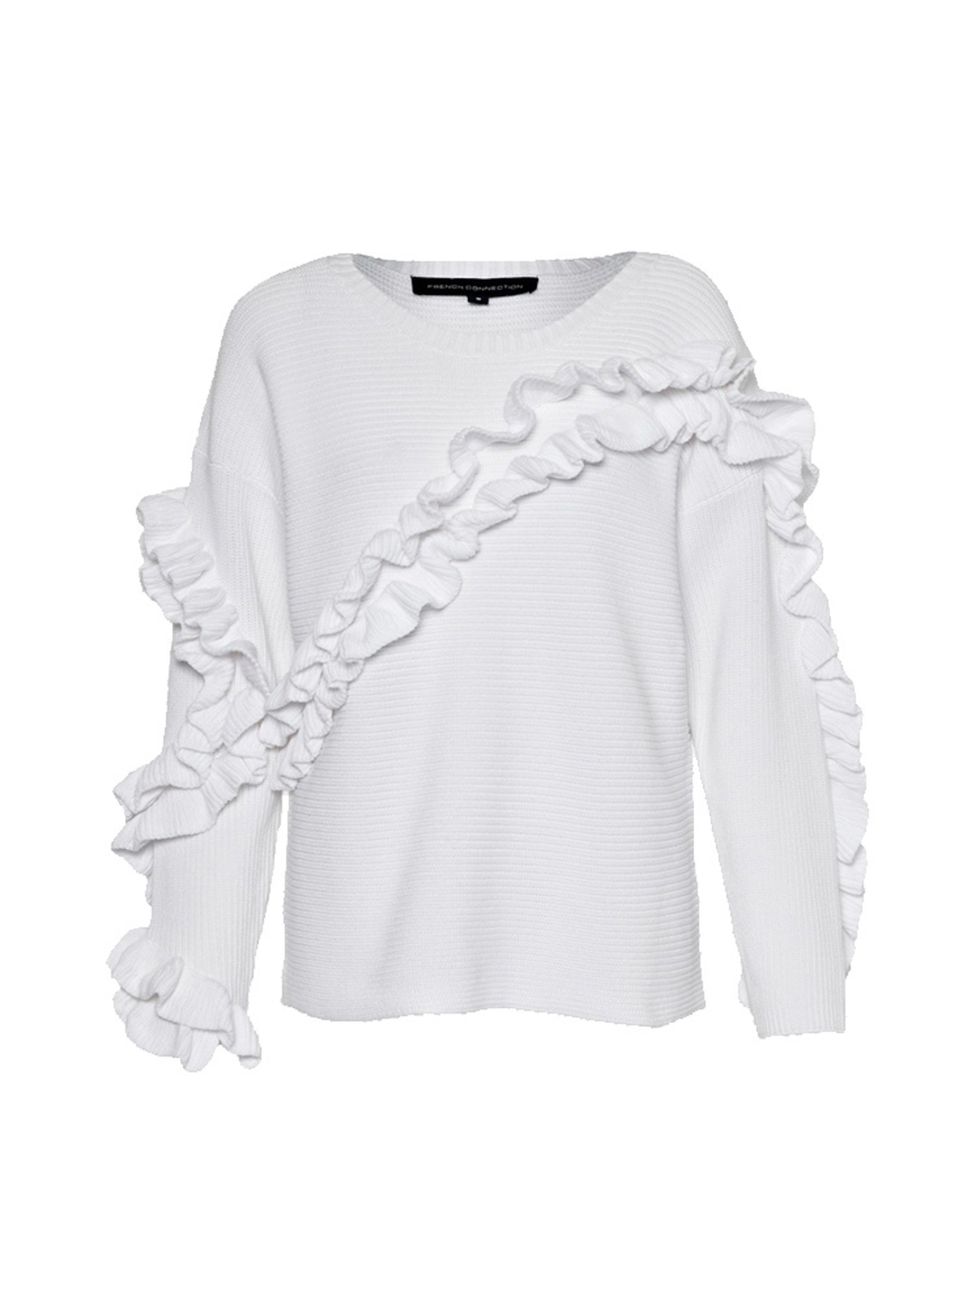 <p>Fashion Intern Billie Bhatia likes to sneak a ruffle detail in with her knitwear.</p>

<p><a href="http://www.frenchconnection.com/product/Woman+Collections+Knitwear/78DAF/Ruth+Frill+Jumper.htm" target="_blank">French Connection</a> white jumper, £89</